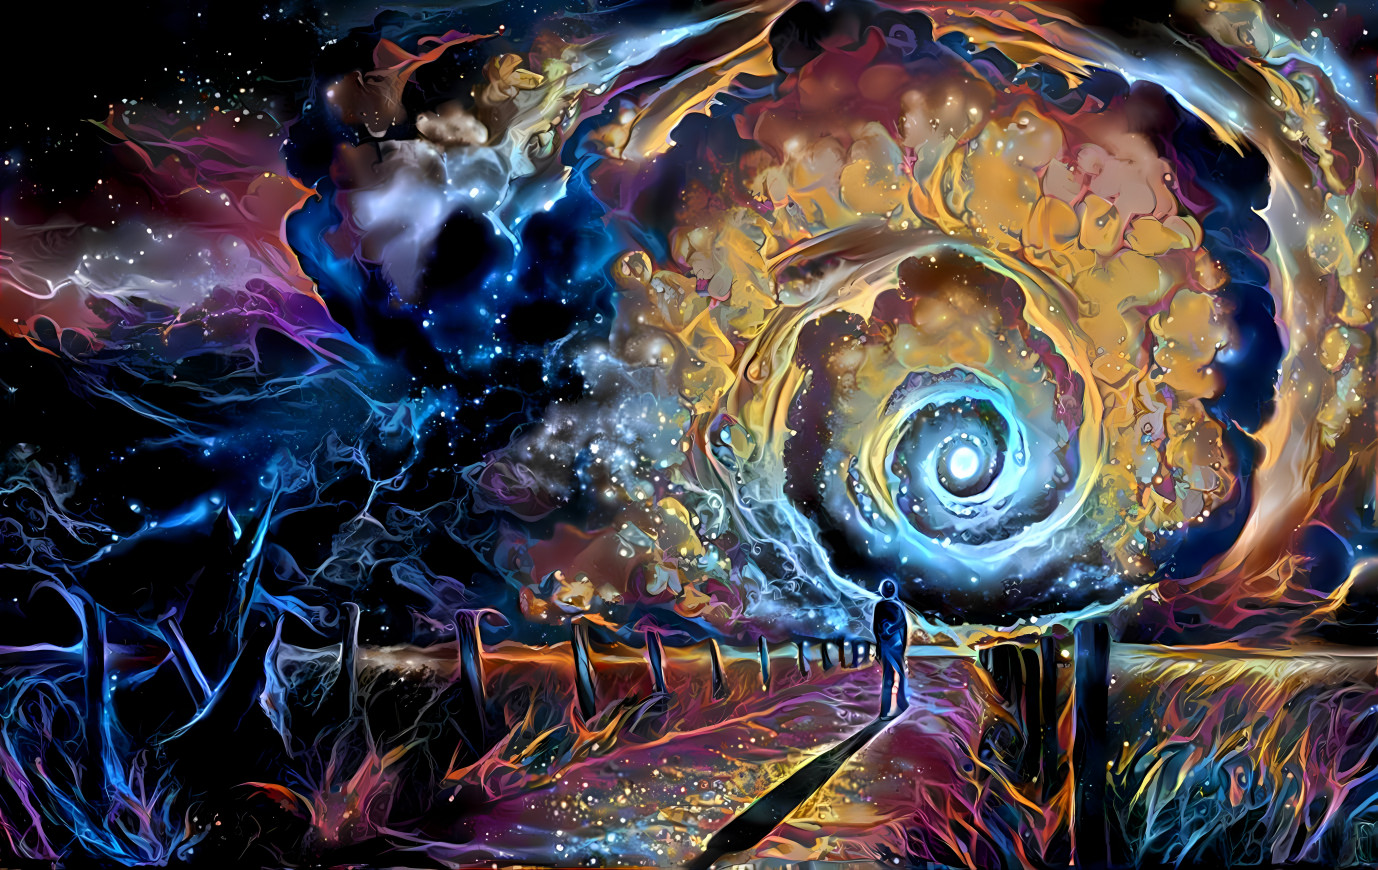 Dissection Of Memory by Jeffrey Smith